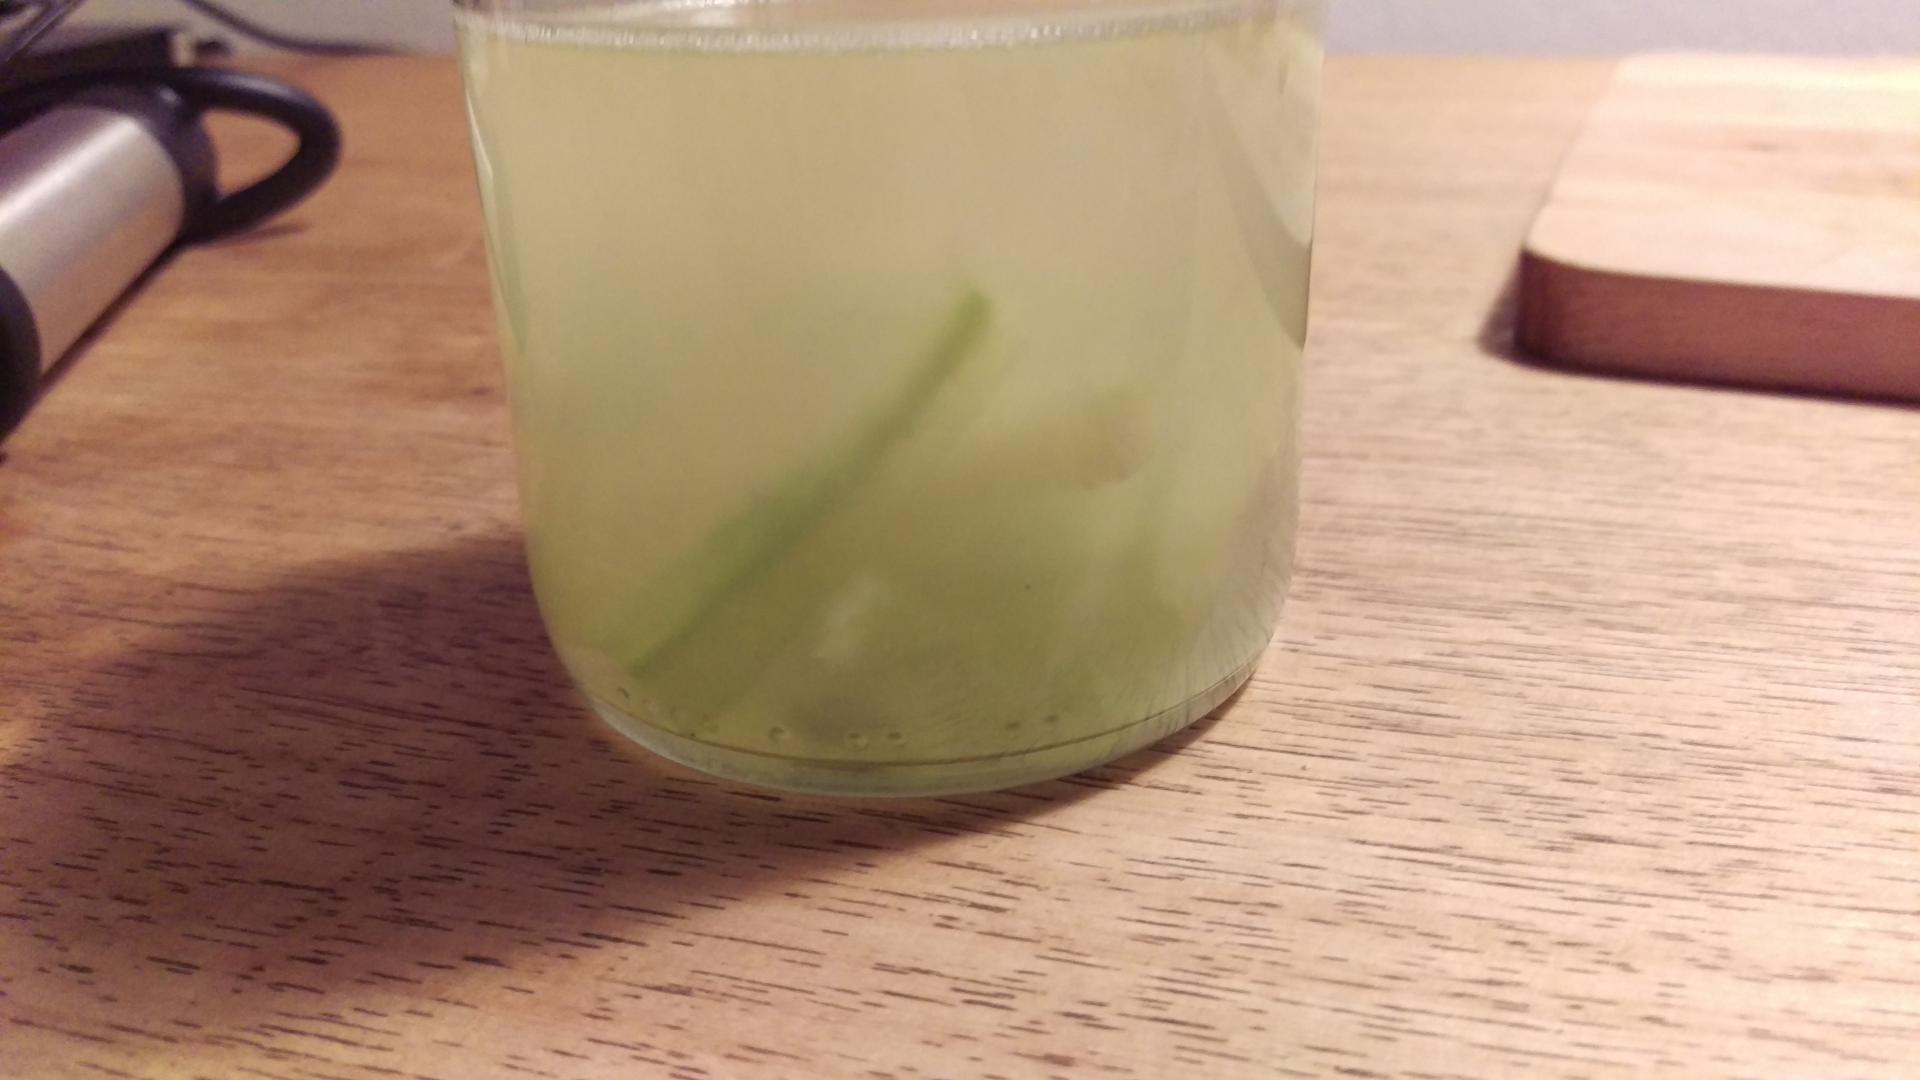 The cucumber becomes transparent